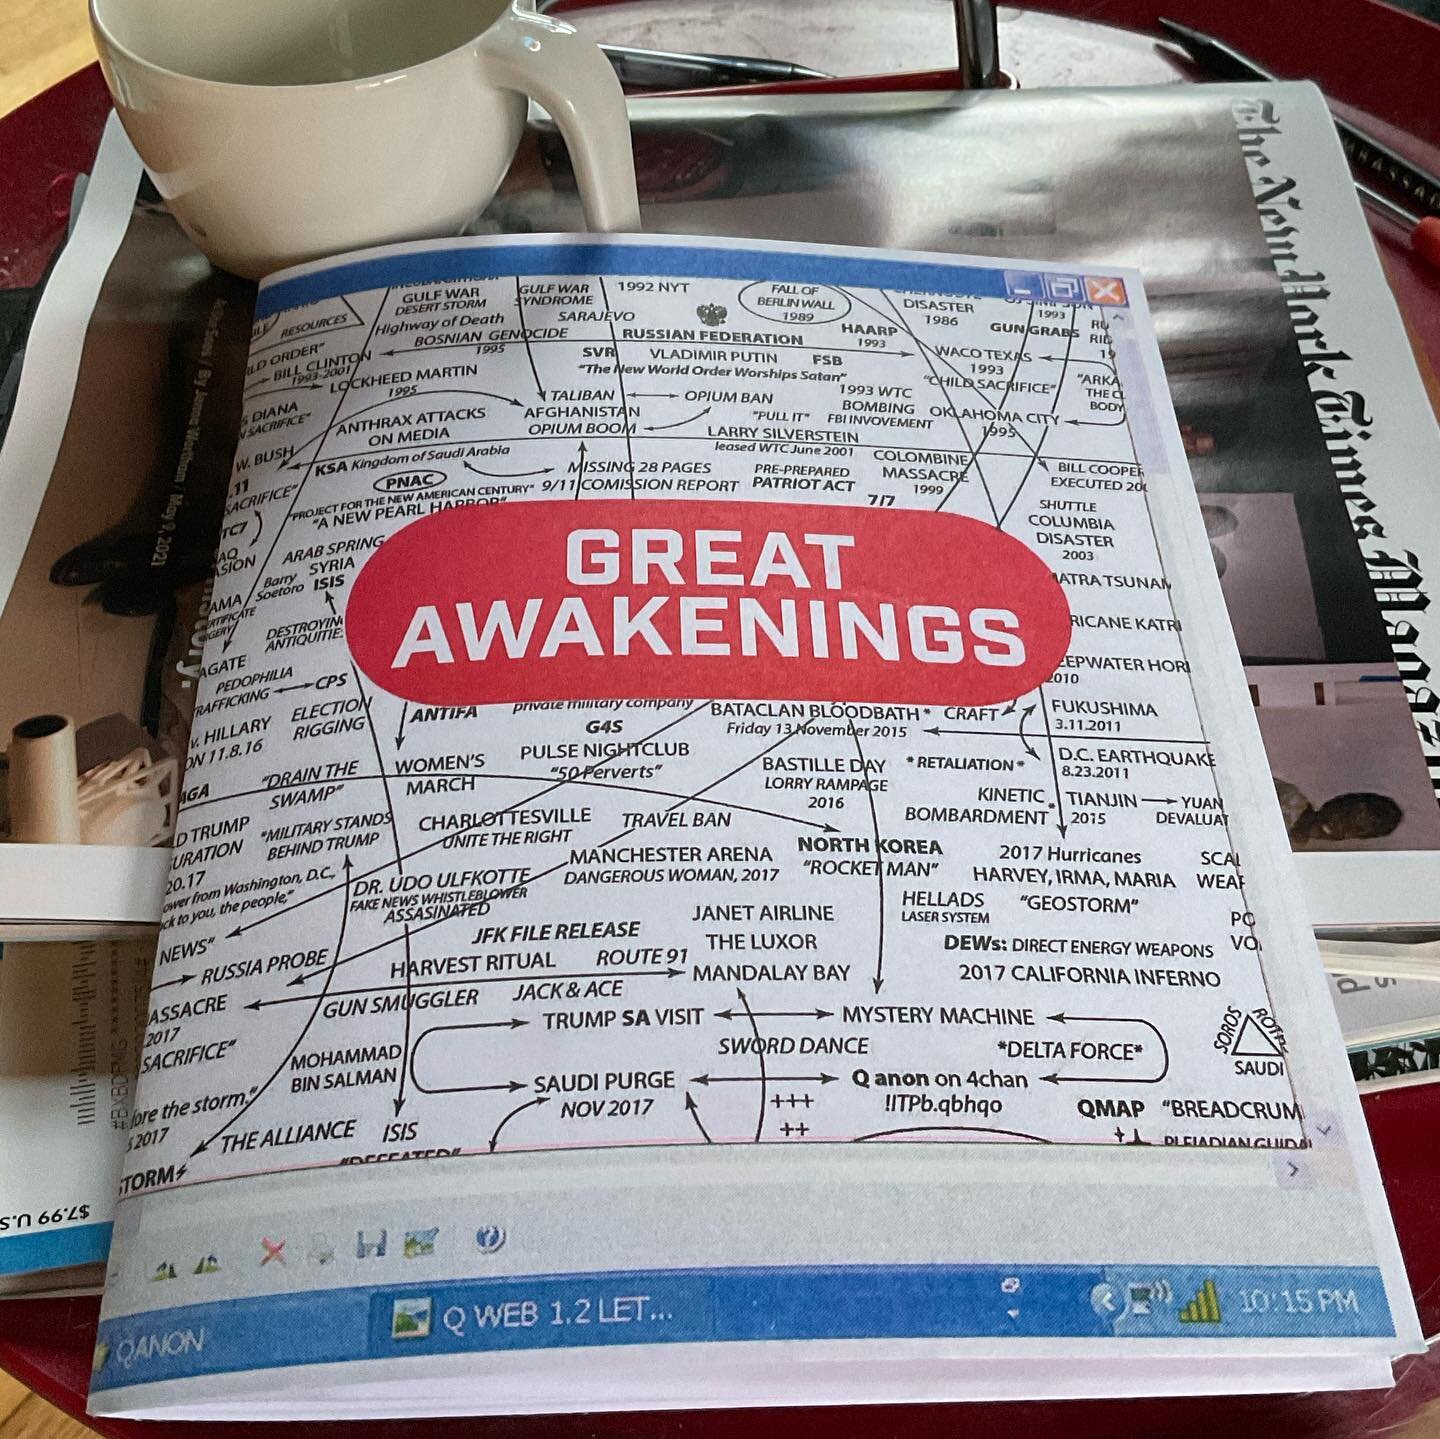 ☀️Good morning! ☀️ Have you ever wondered how people fall into alternative realities? 💊I&rsquo;ve been curious too, and I&rsquo;ve been spending way too much time online trying to understand. &ldquo;Great Awakenings&rdquo; is a collection of stories